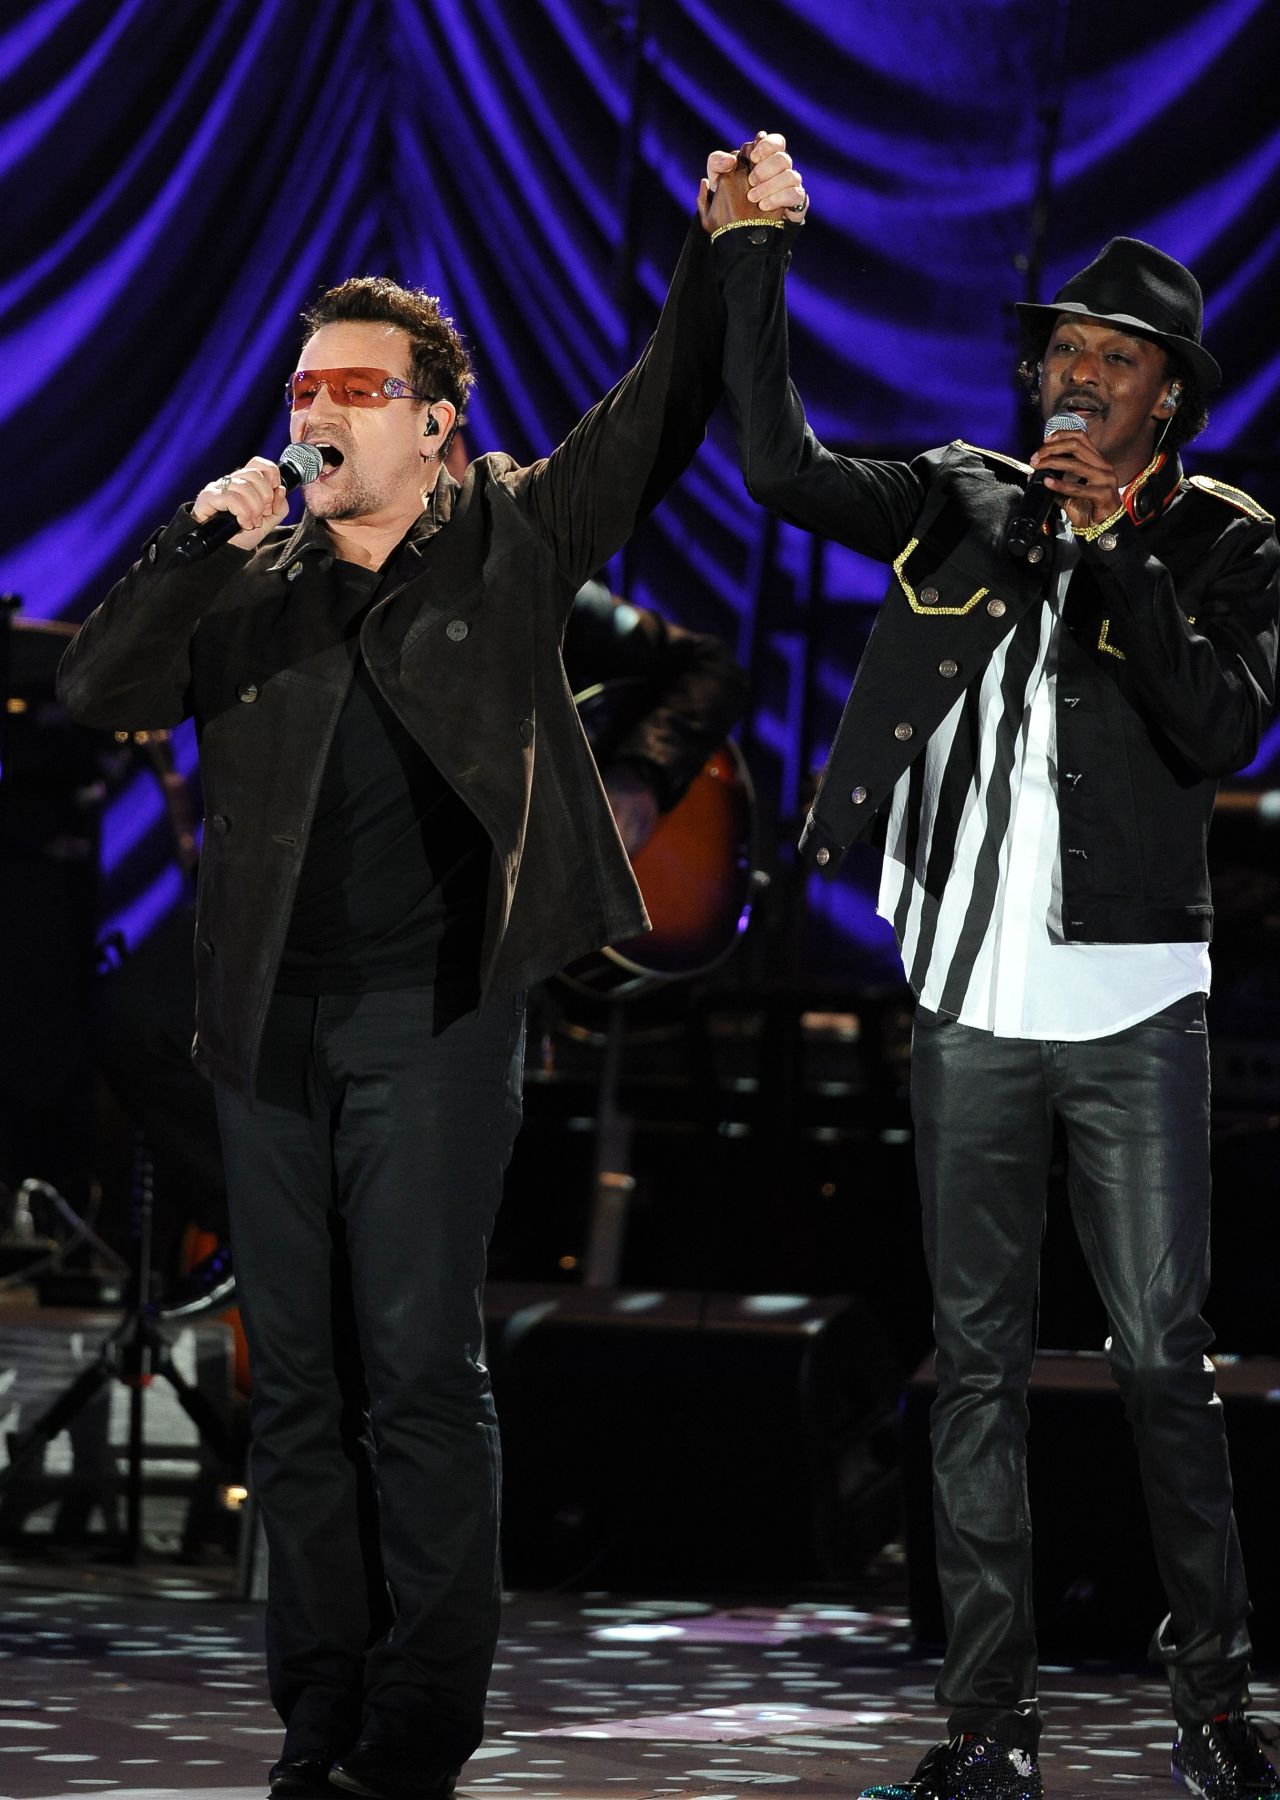 U2 singer Bono and K'naan perform at the Clinton Foundation's Decade of Difference concert on October 15, 2011 at the Hollywood Bowl in California.